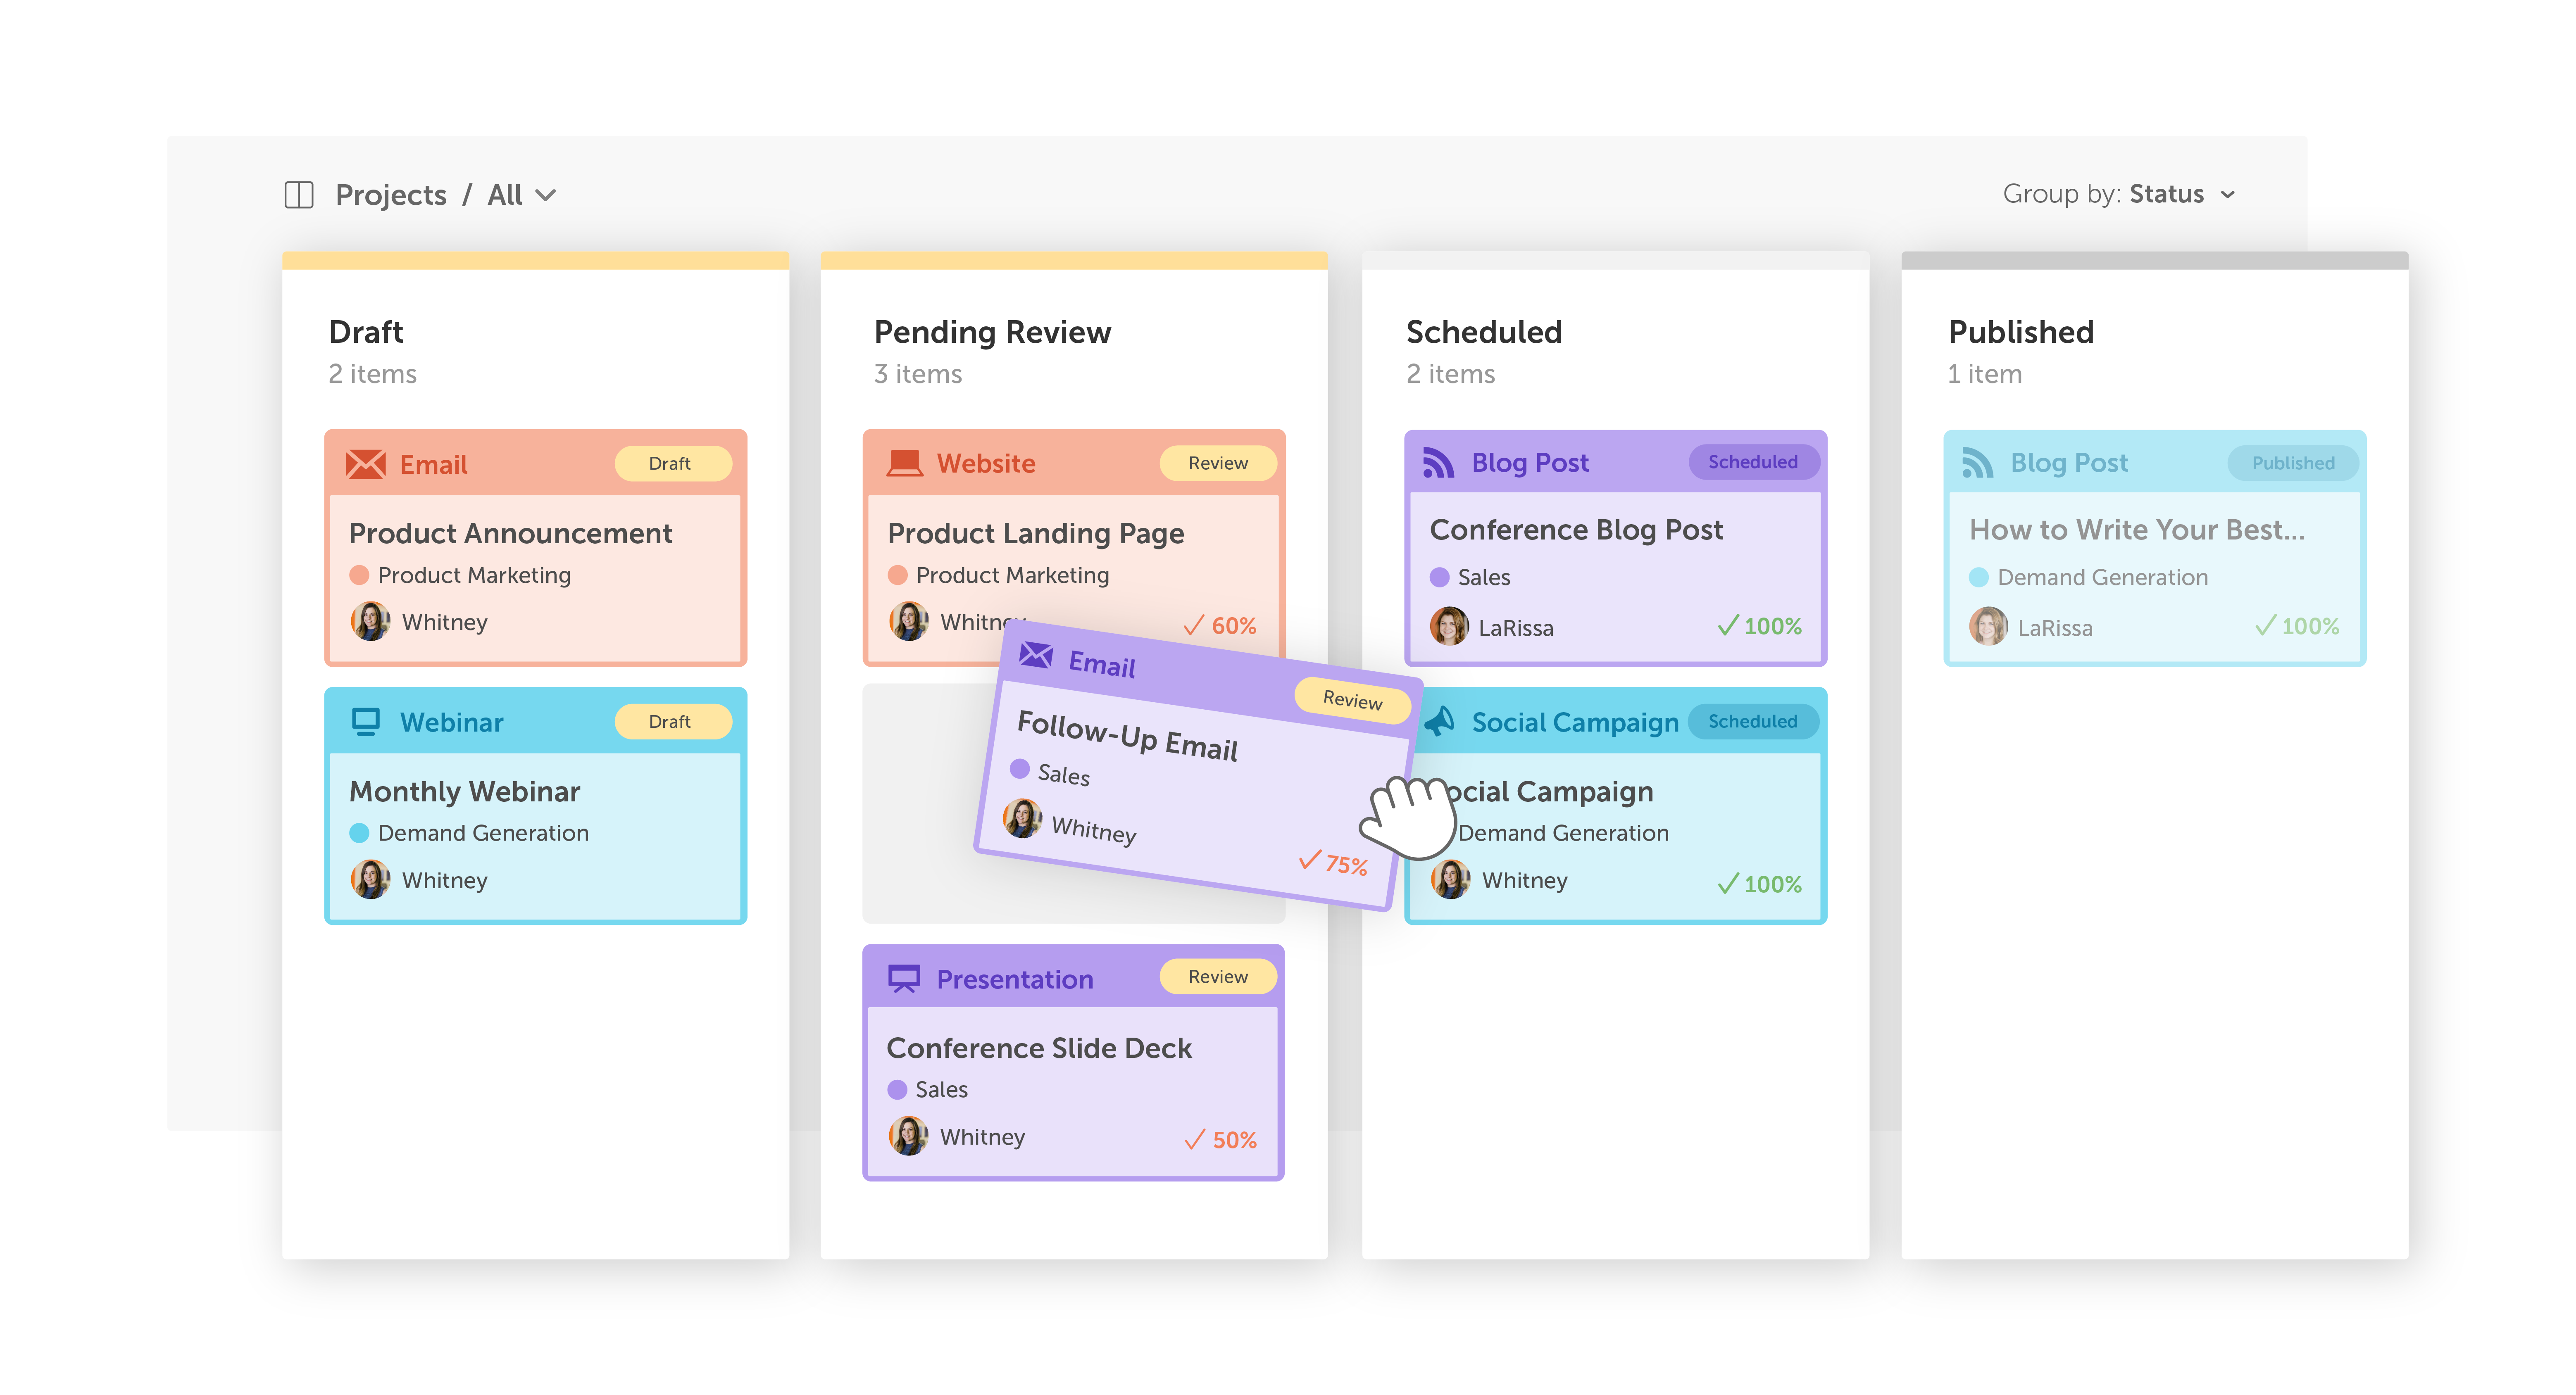 Triage & prioritize projects with Kanban Boards. Idea Board is a customizable Kanban Board to field requests, earn stakeholder buy-in before execution, and save ideas without distracting your current work schedule.